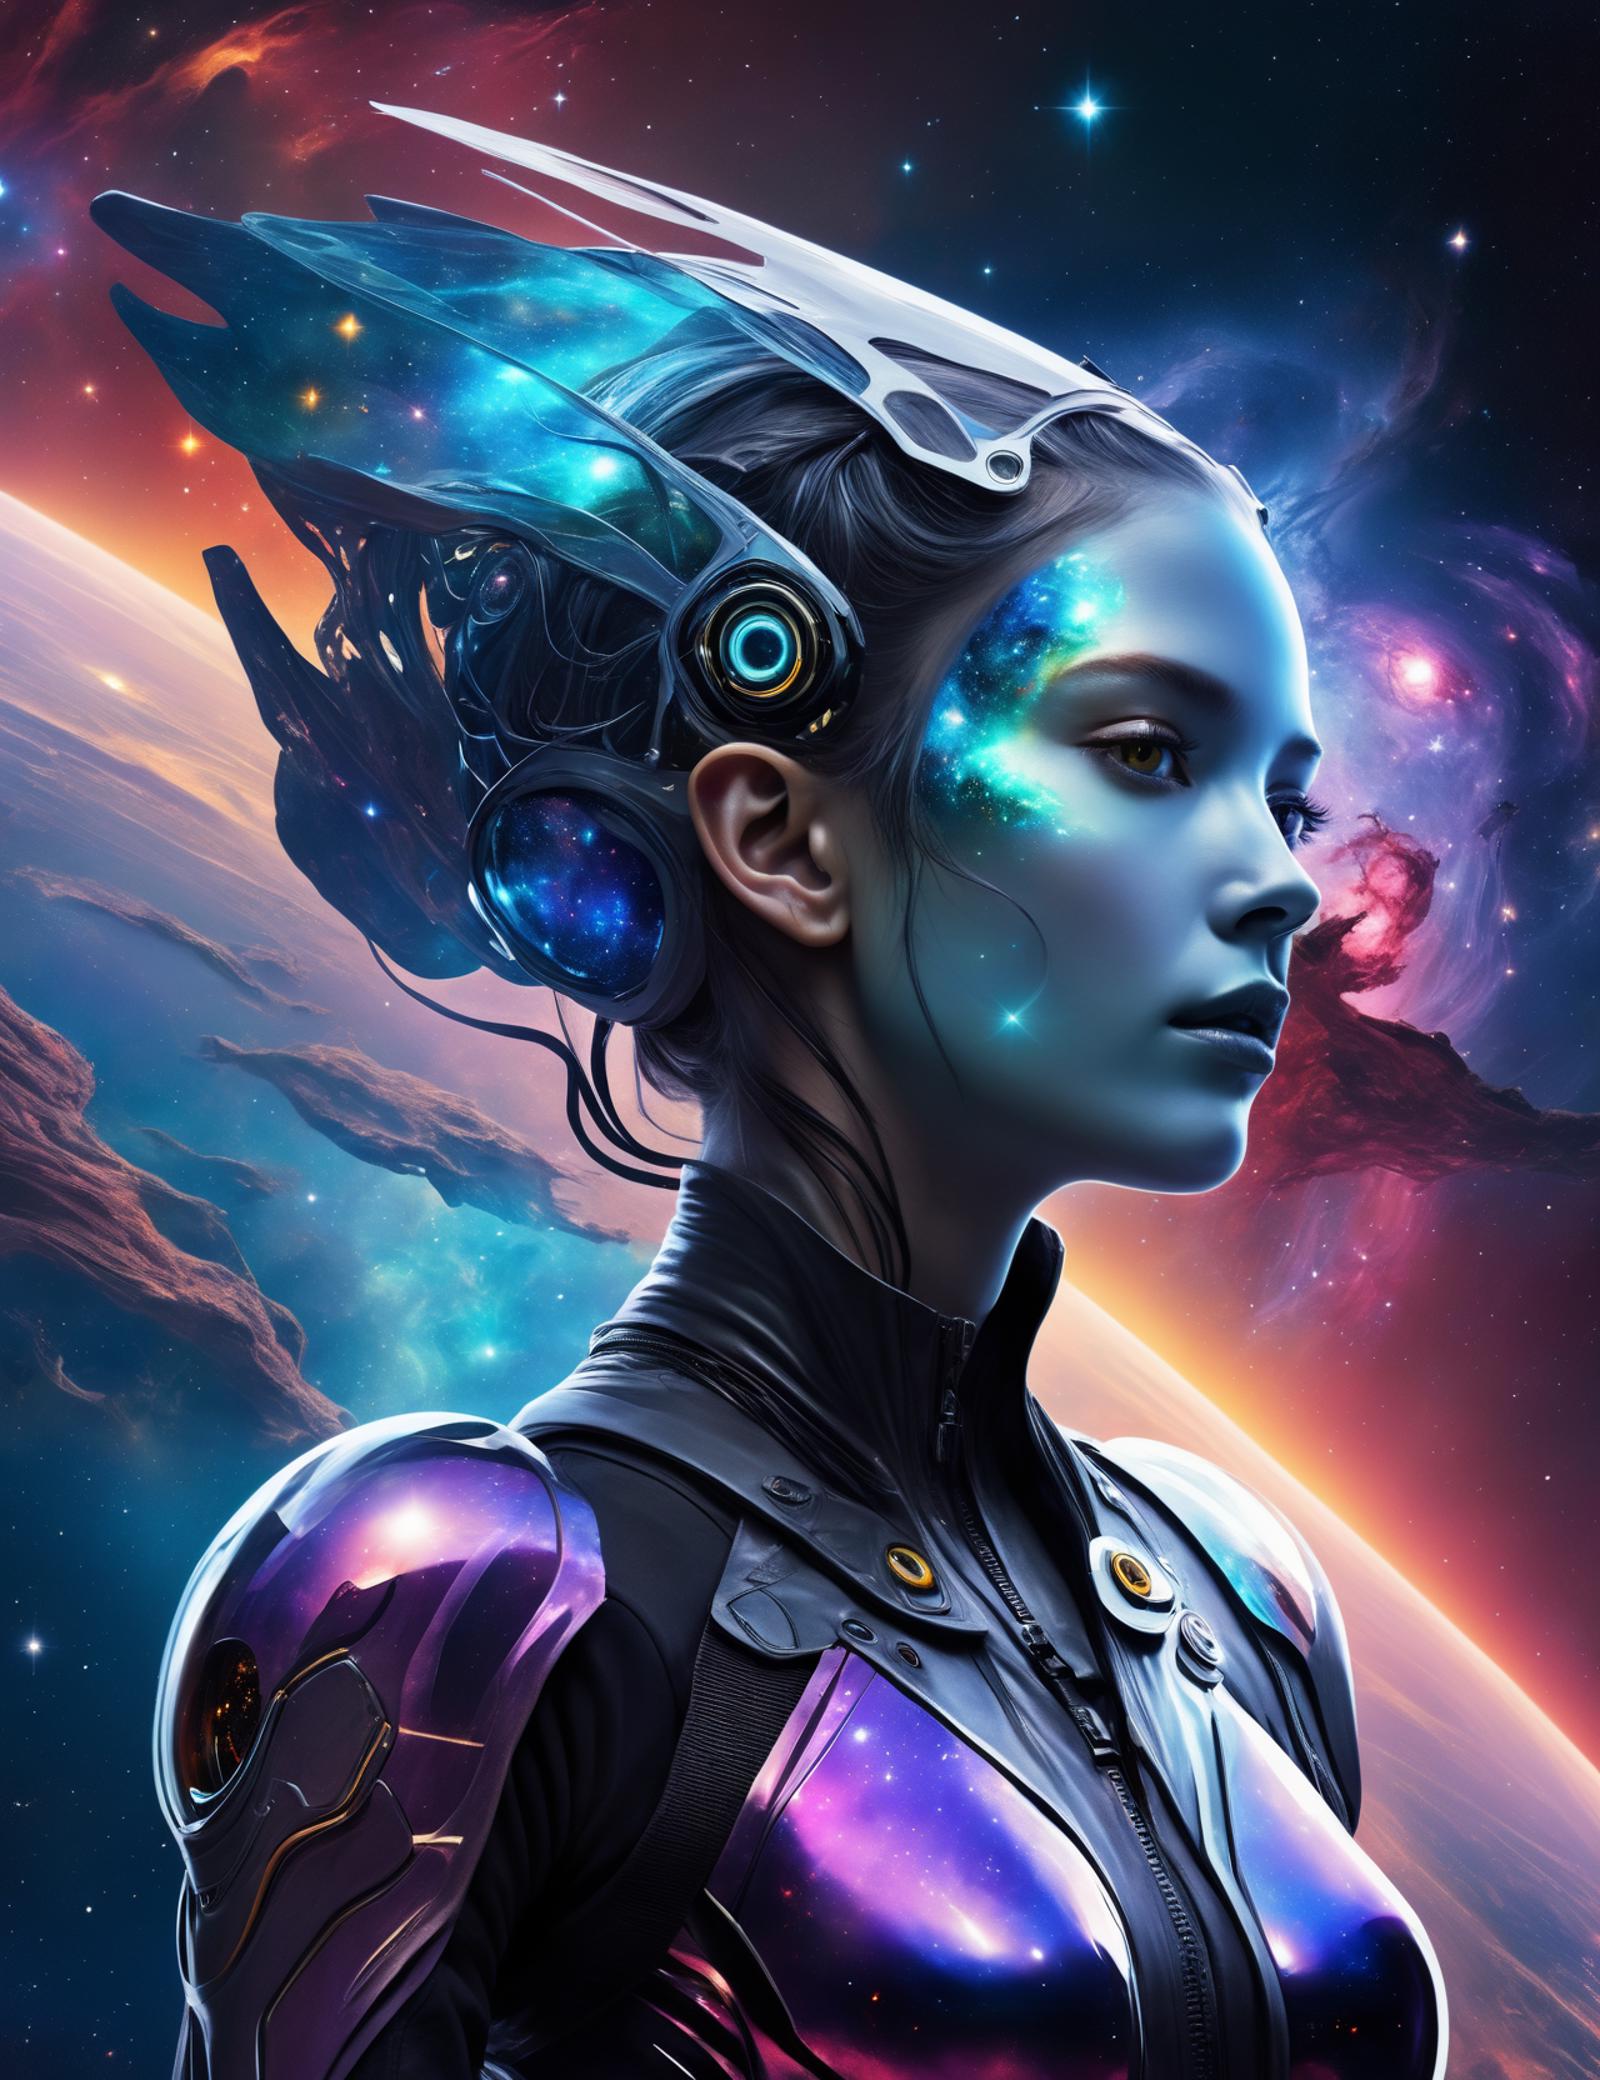 A woman with blue hair and purple armor standing in front of a planet.